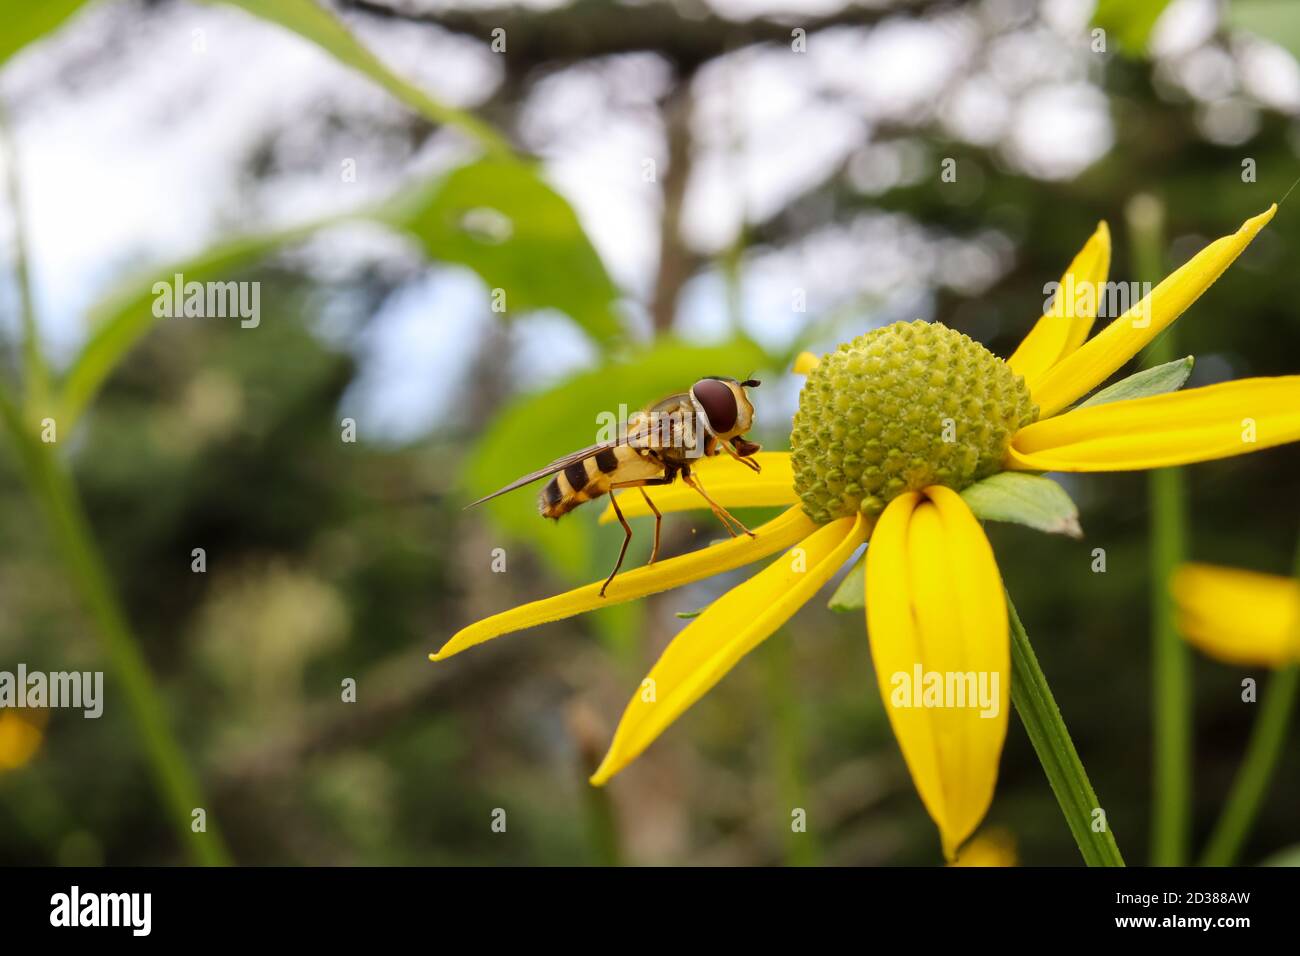 A hover fly (Syrphid fly) in the family Syrphidae on a large yellow flower. This bee or wasp mimic hovers around flowers and feeds on their nectar. Stock Photo